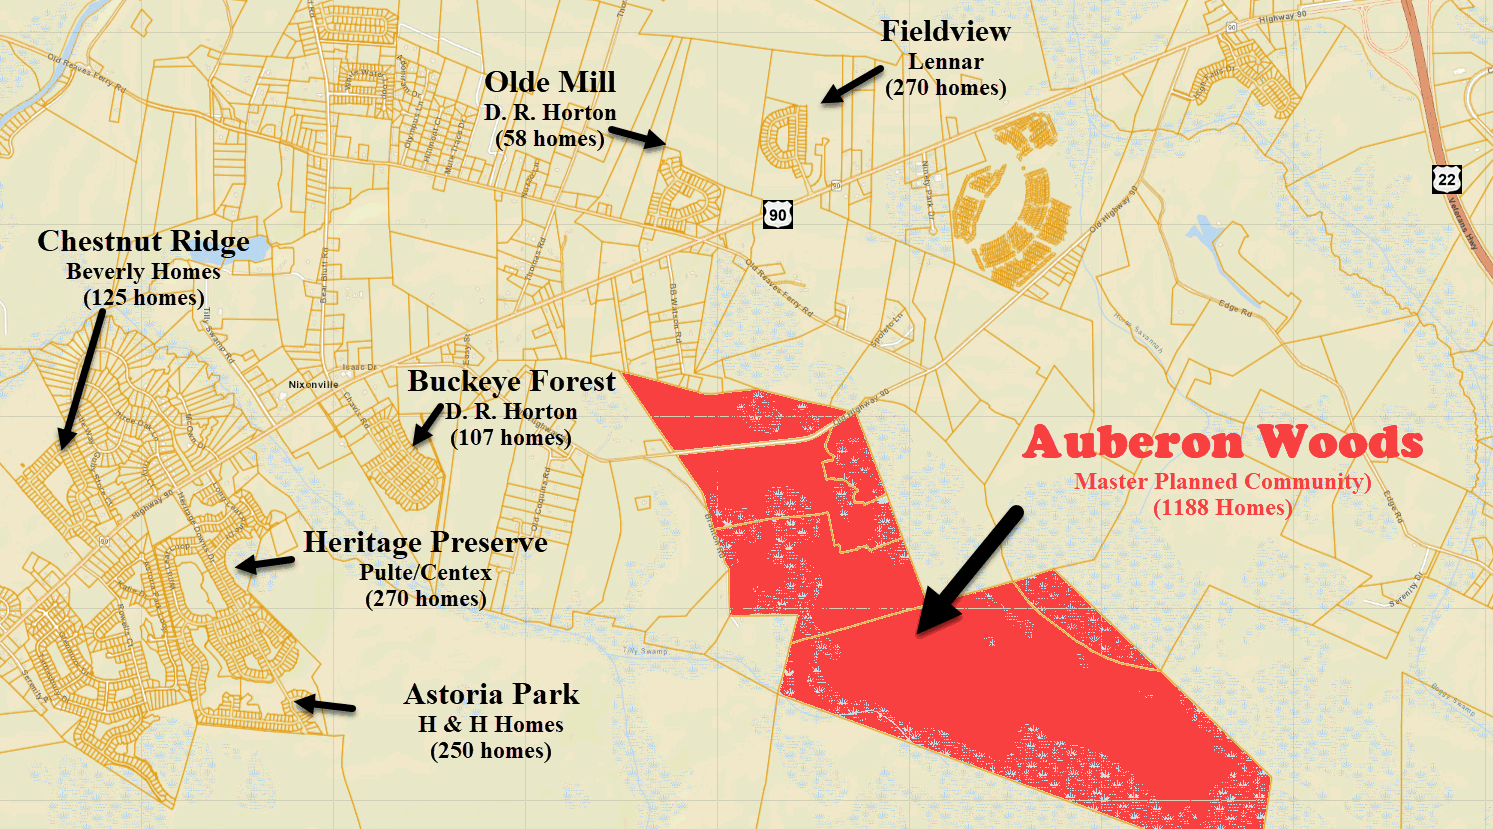 Auberon Woods new home community in Conway